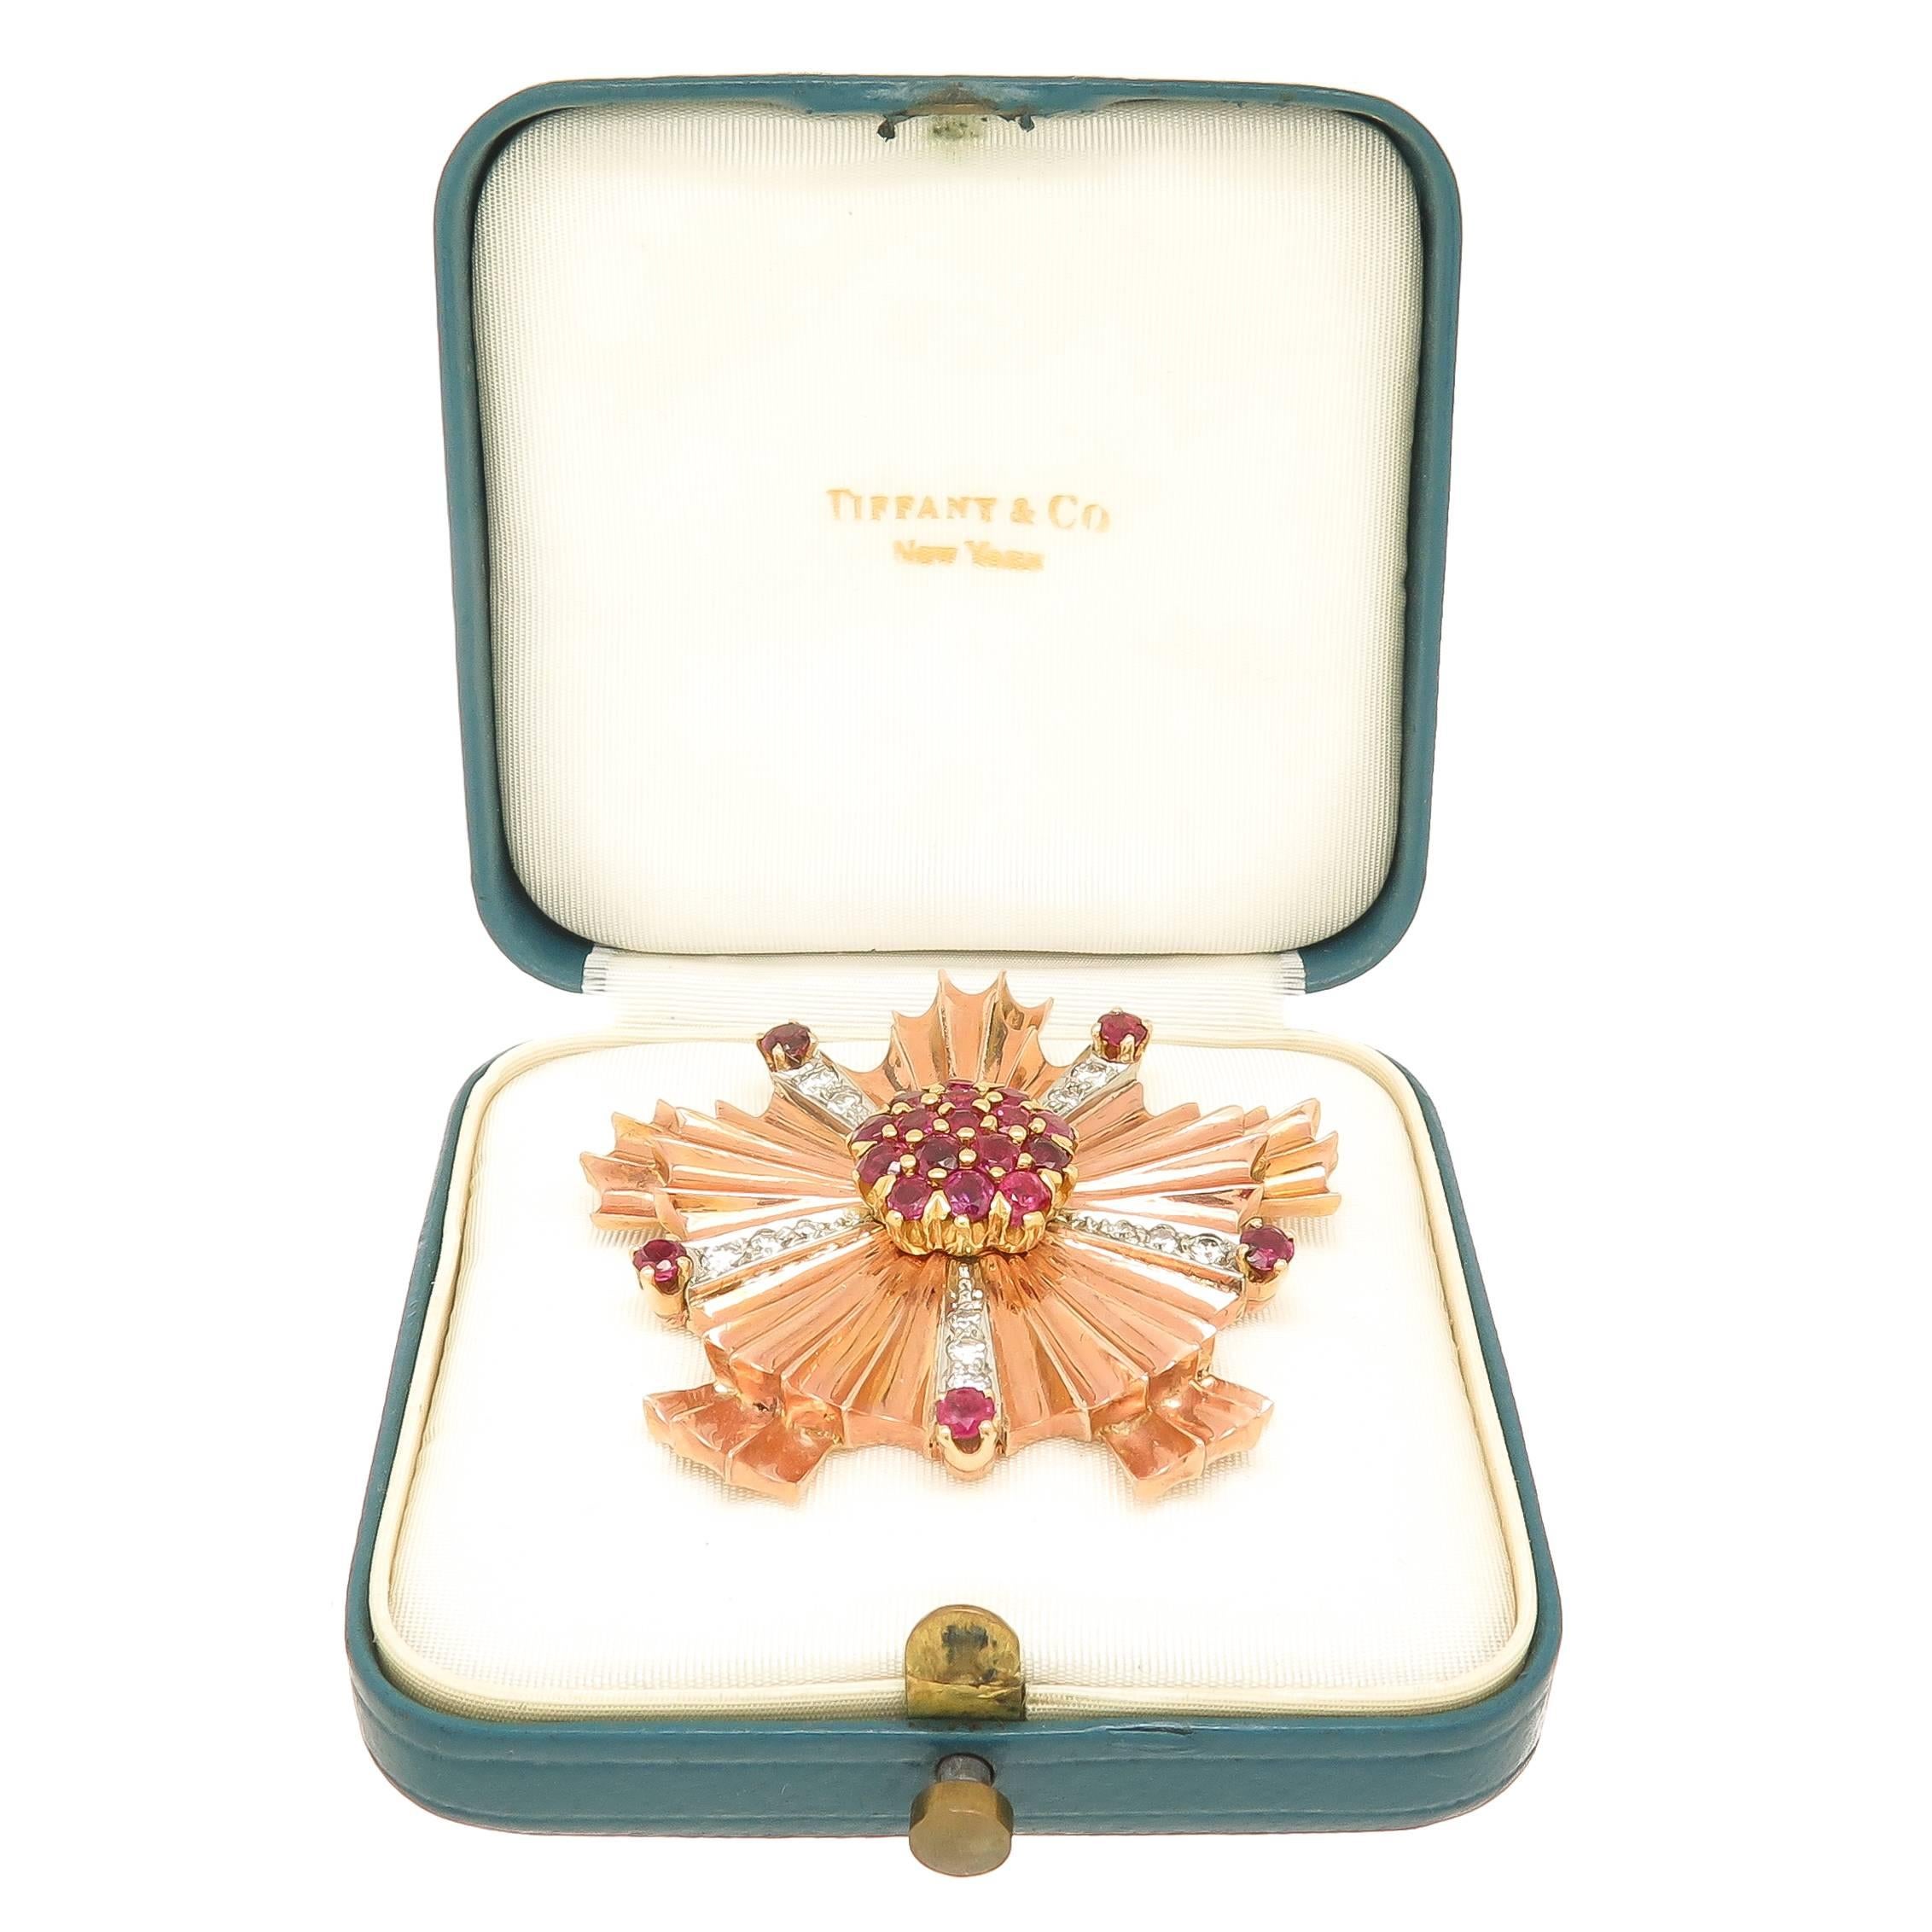 Circa 1940 Tiffany & Company 14K Rose Gold Brooch in a very strong Retro period style, measuring 1 5/8 inch in Diameter and set with older cut Diamonds totaling .50 Carat and further set with Very Fine Color Rubies. Comes in Original Tiffany &